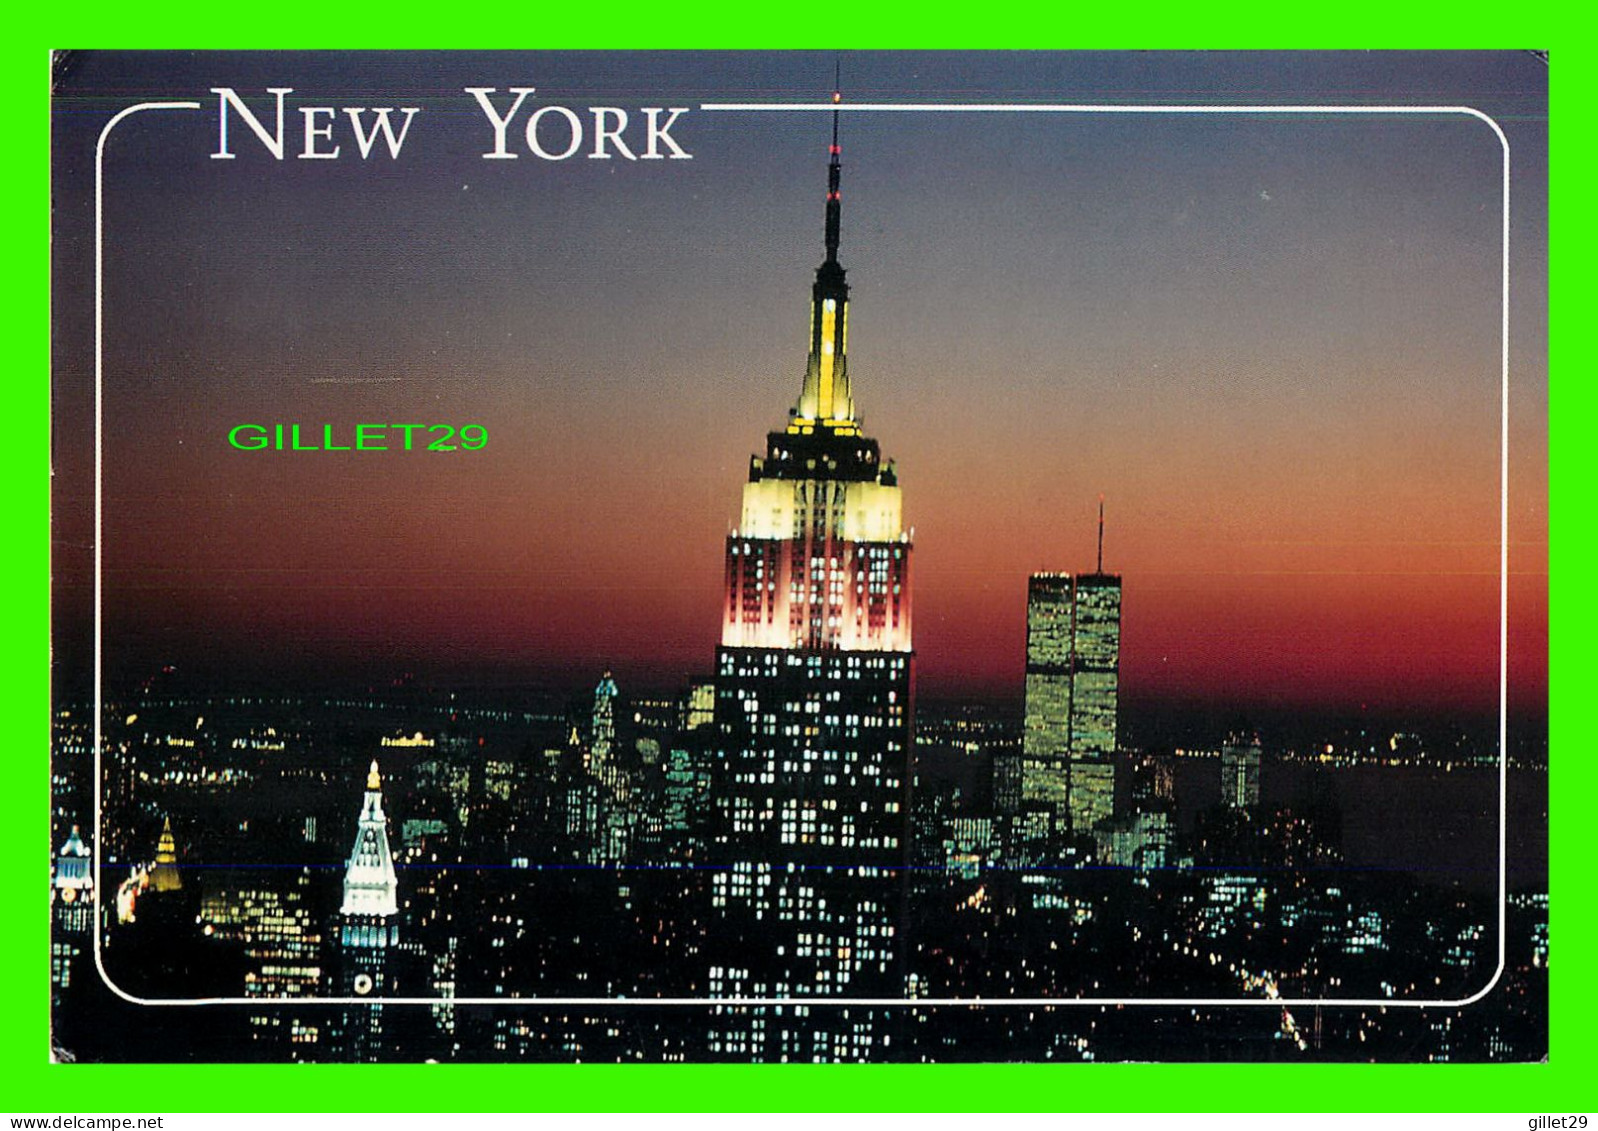 NEW YORK CITY, NY - NIGHT VIEW - ALAN SCHEIN - CITY VISIONS POST CARDS - - Panoramic Views